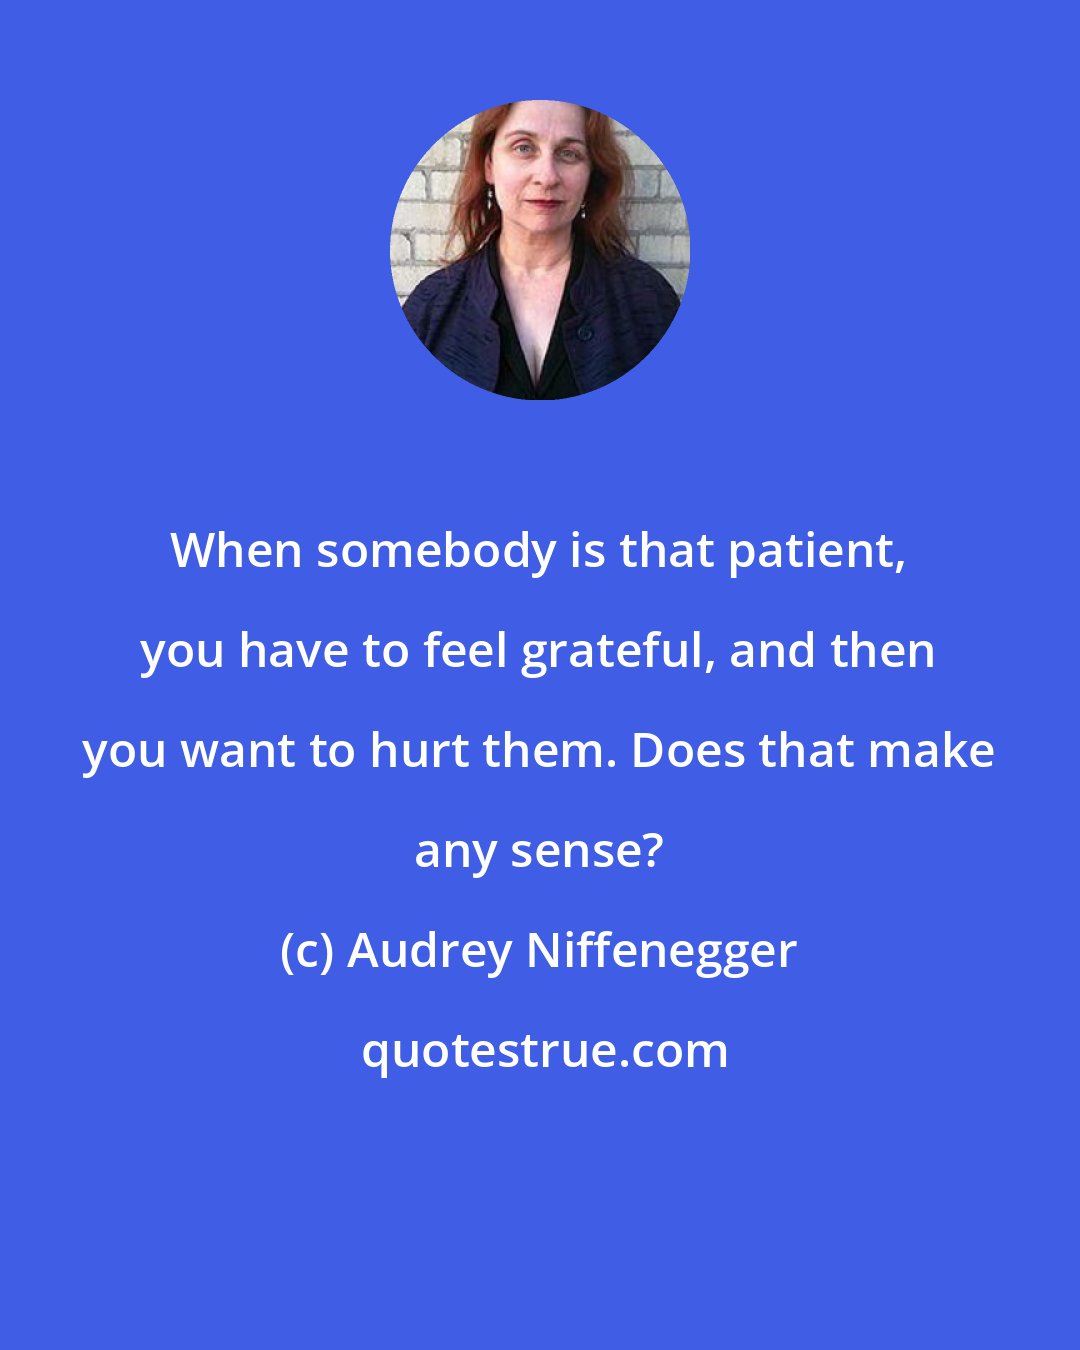 Audrey Niffenegger: When somebody is that patient, you have to feel grateful, and then you want to hurt them. Does that make any sense?